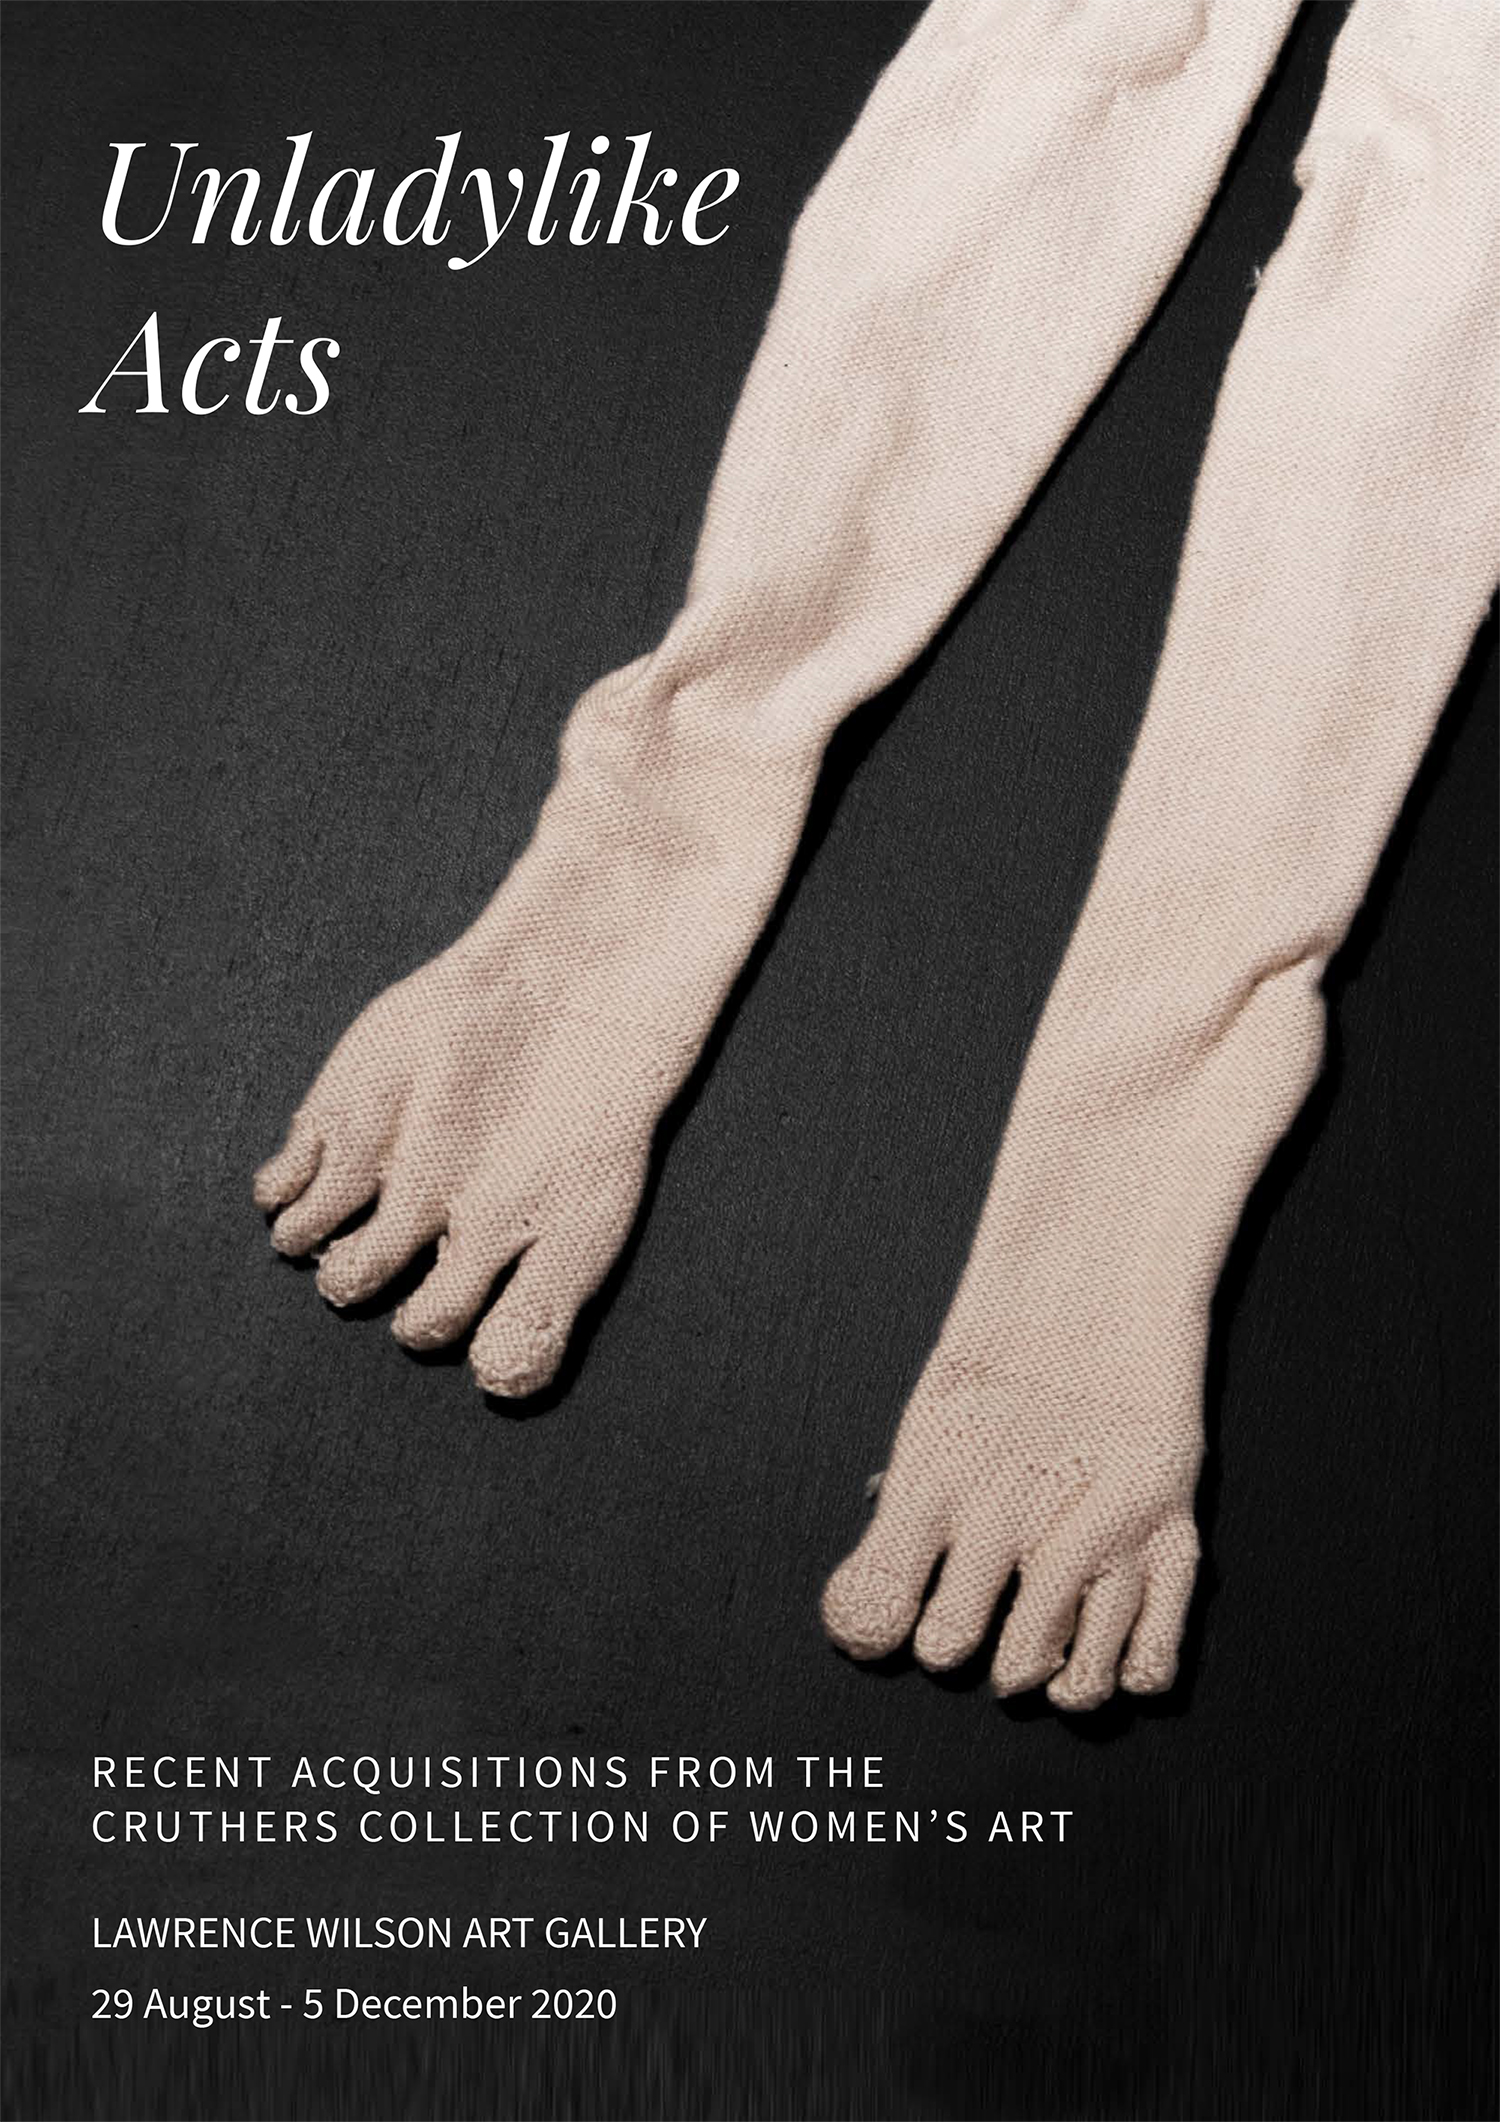 Cover of the (Un)ladylike Acts gatefold catalogue, featuring a close-up photograph of two woven feet and legs